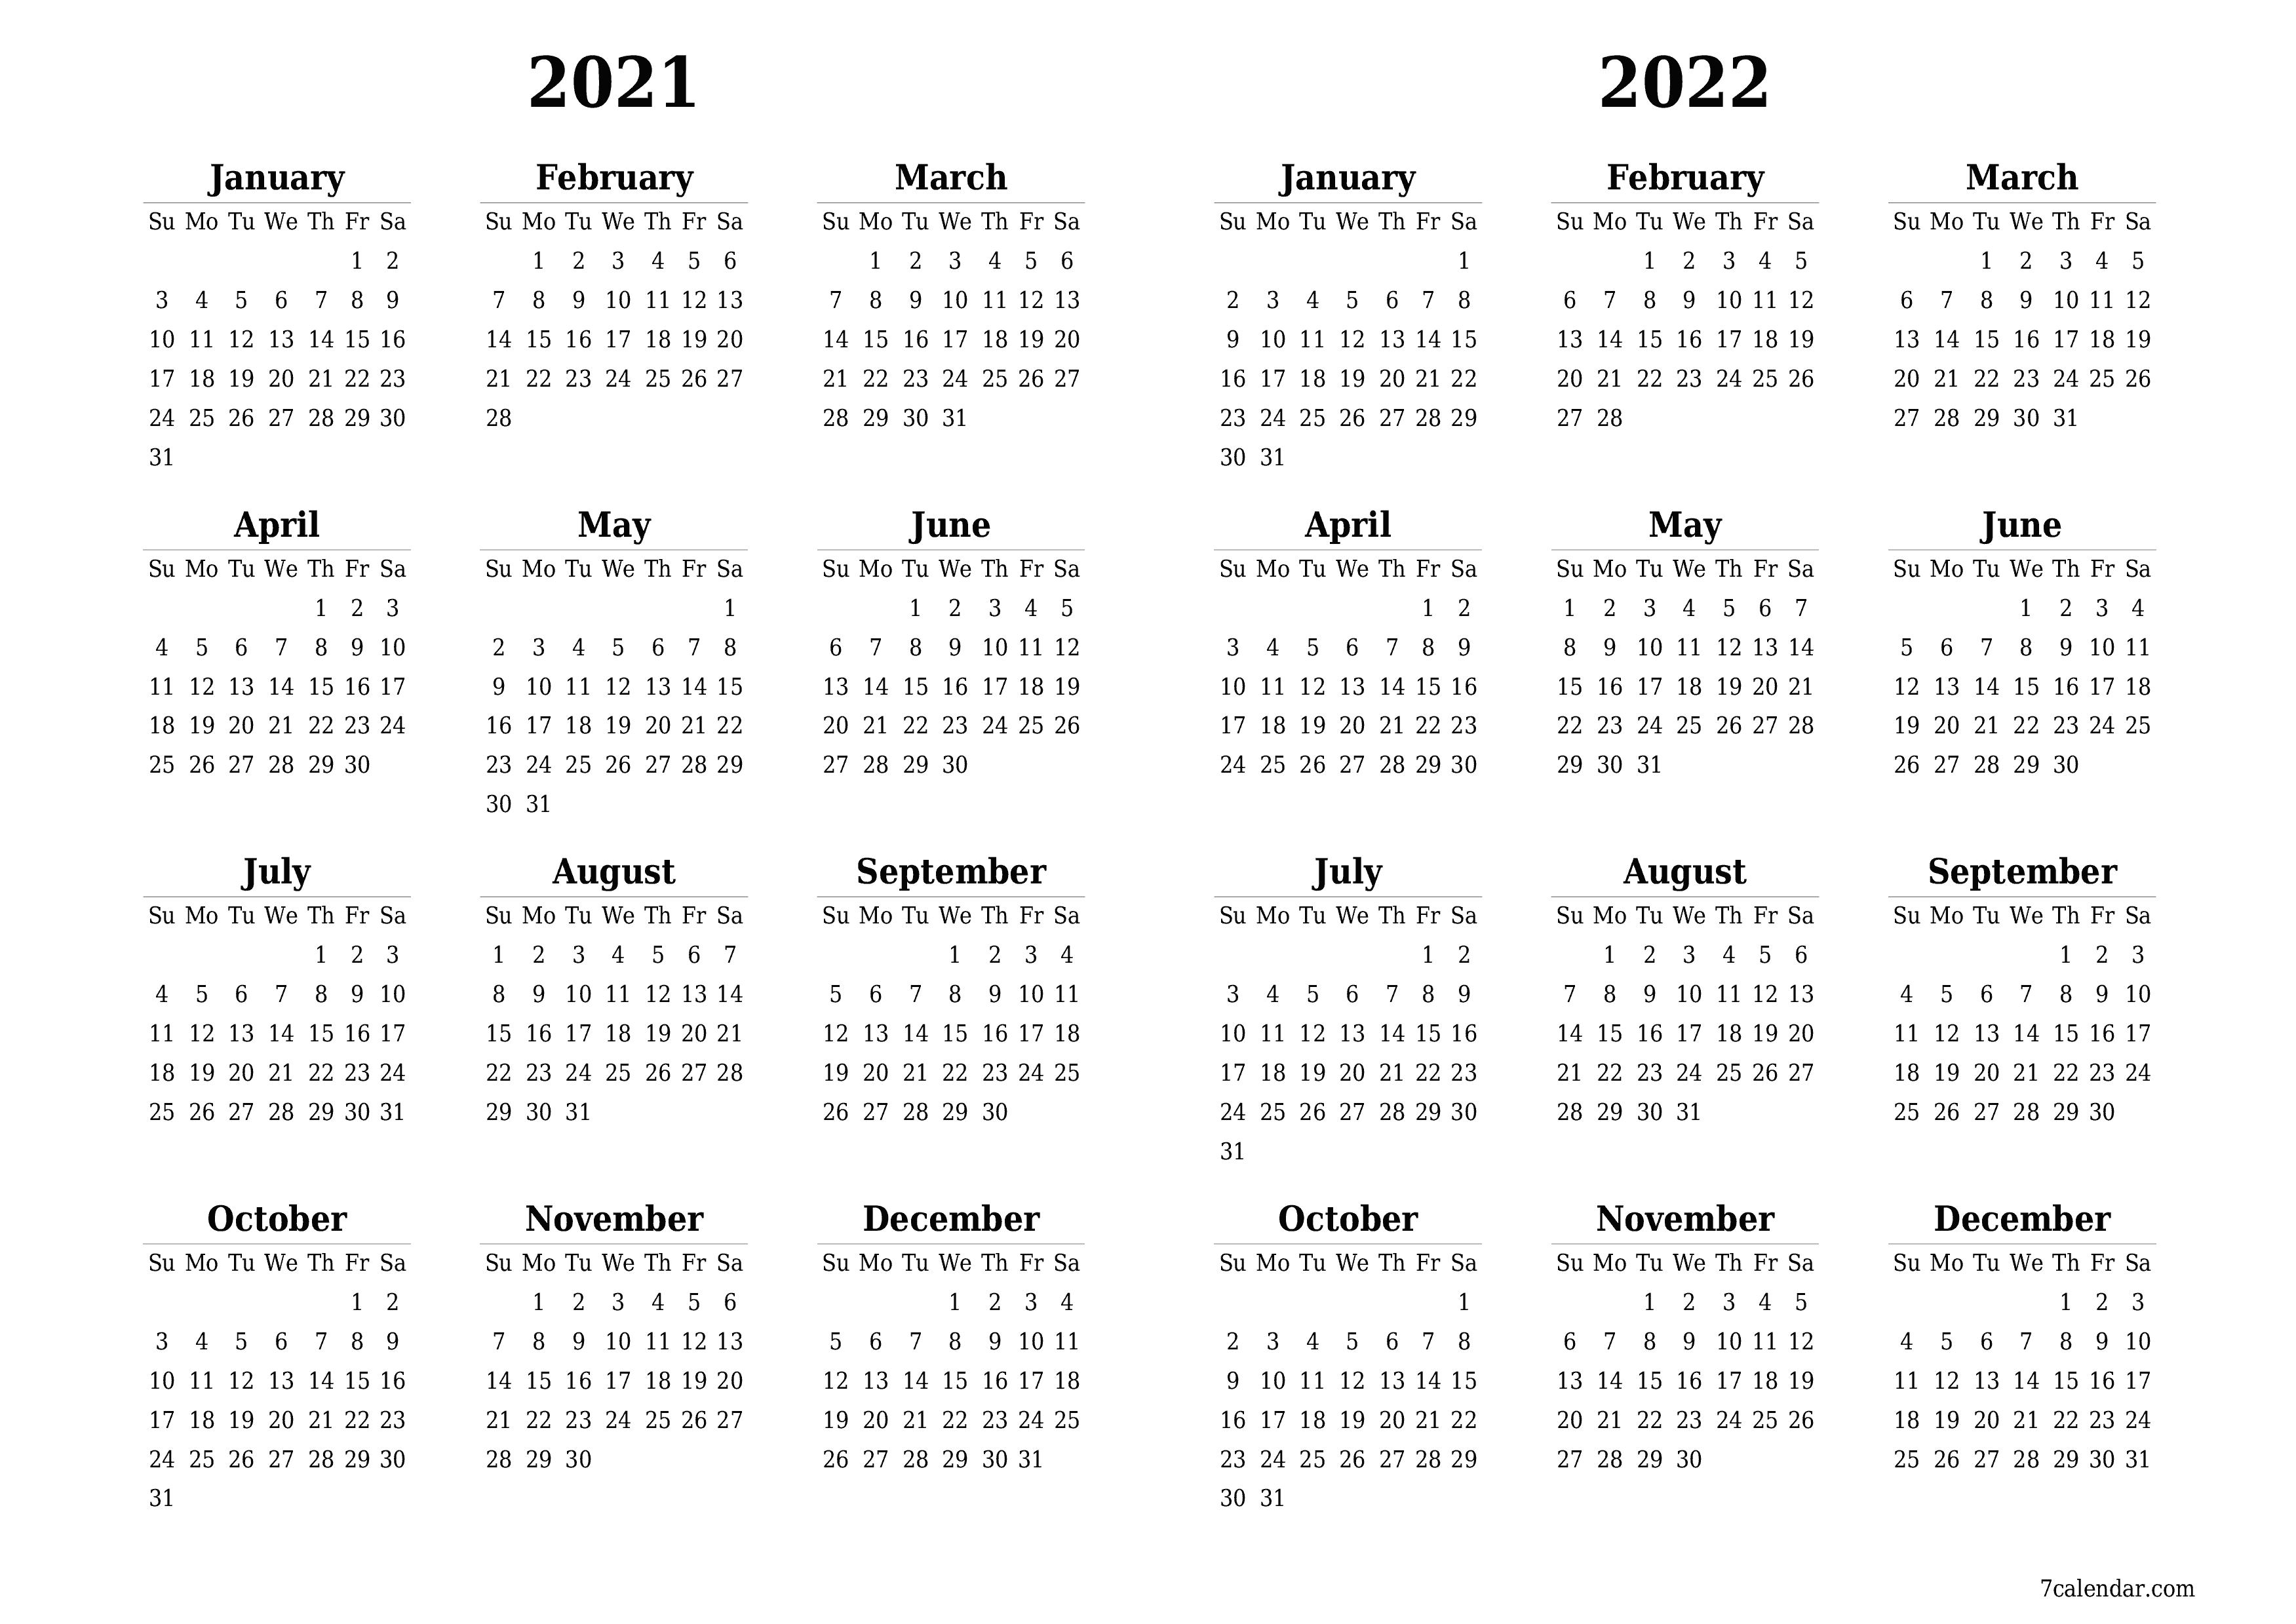 Blank yearly printable calendar and planner for the year 2021, 2022 with notes, save and print to PDF PNG English - 7calendar.com